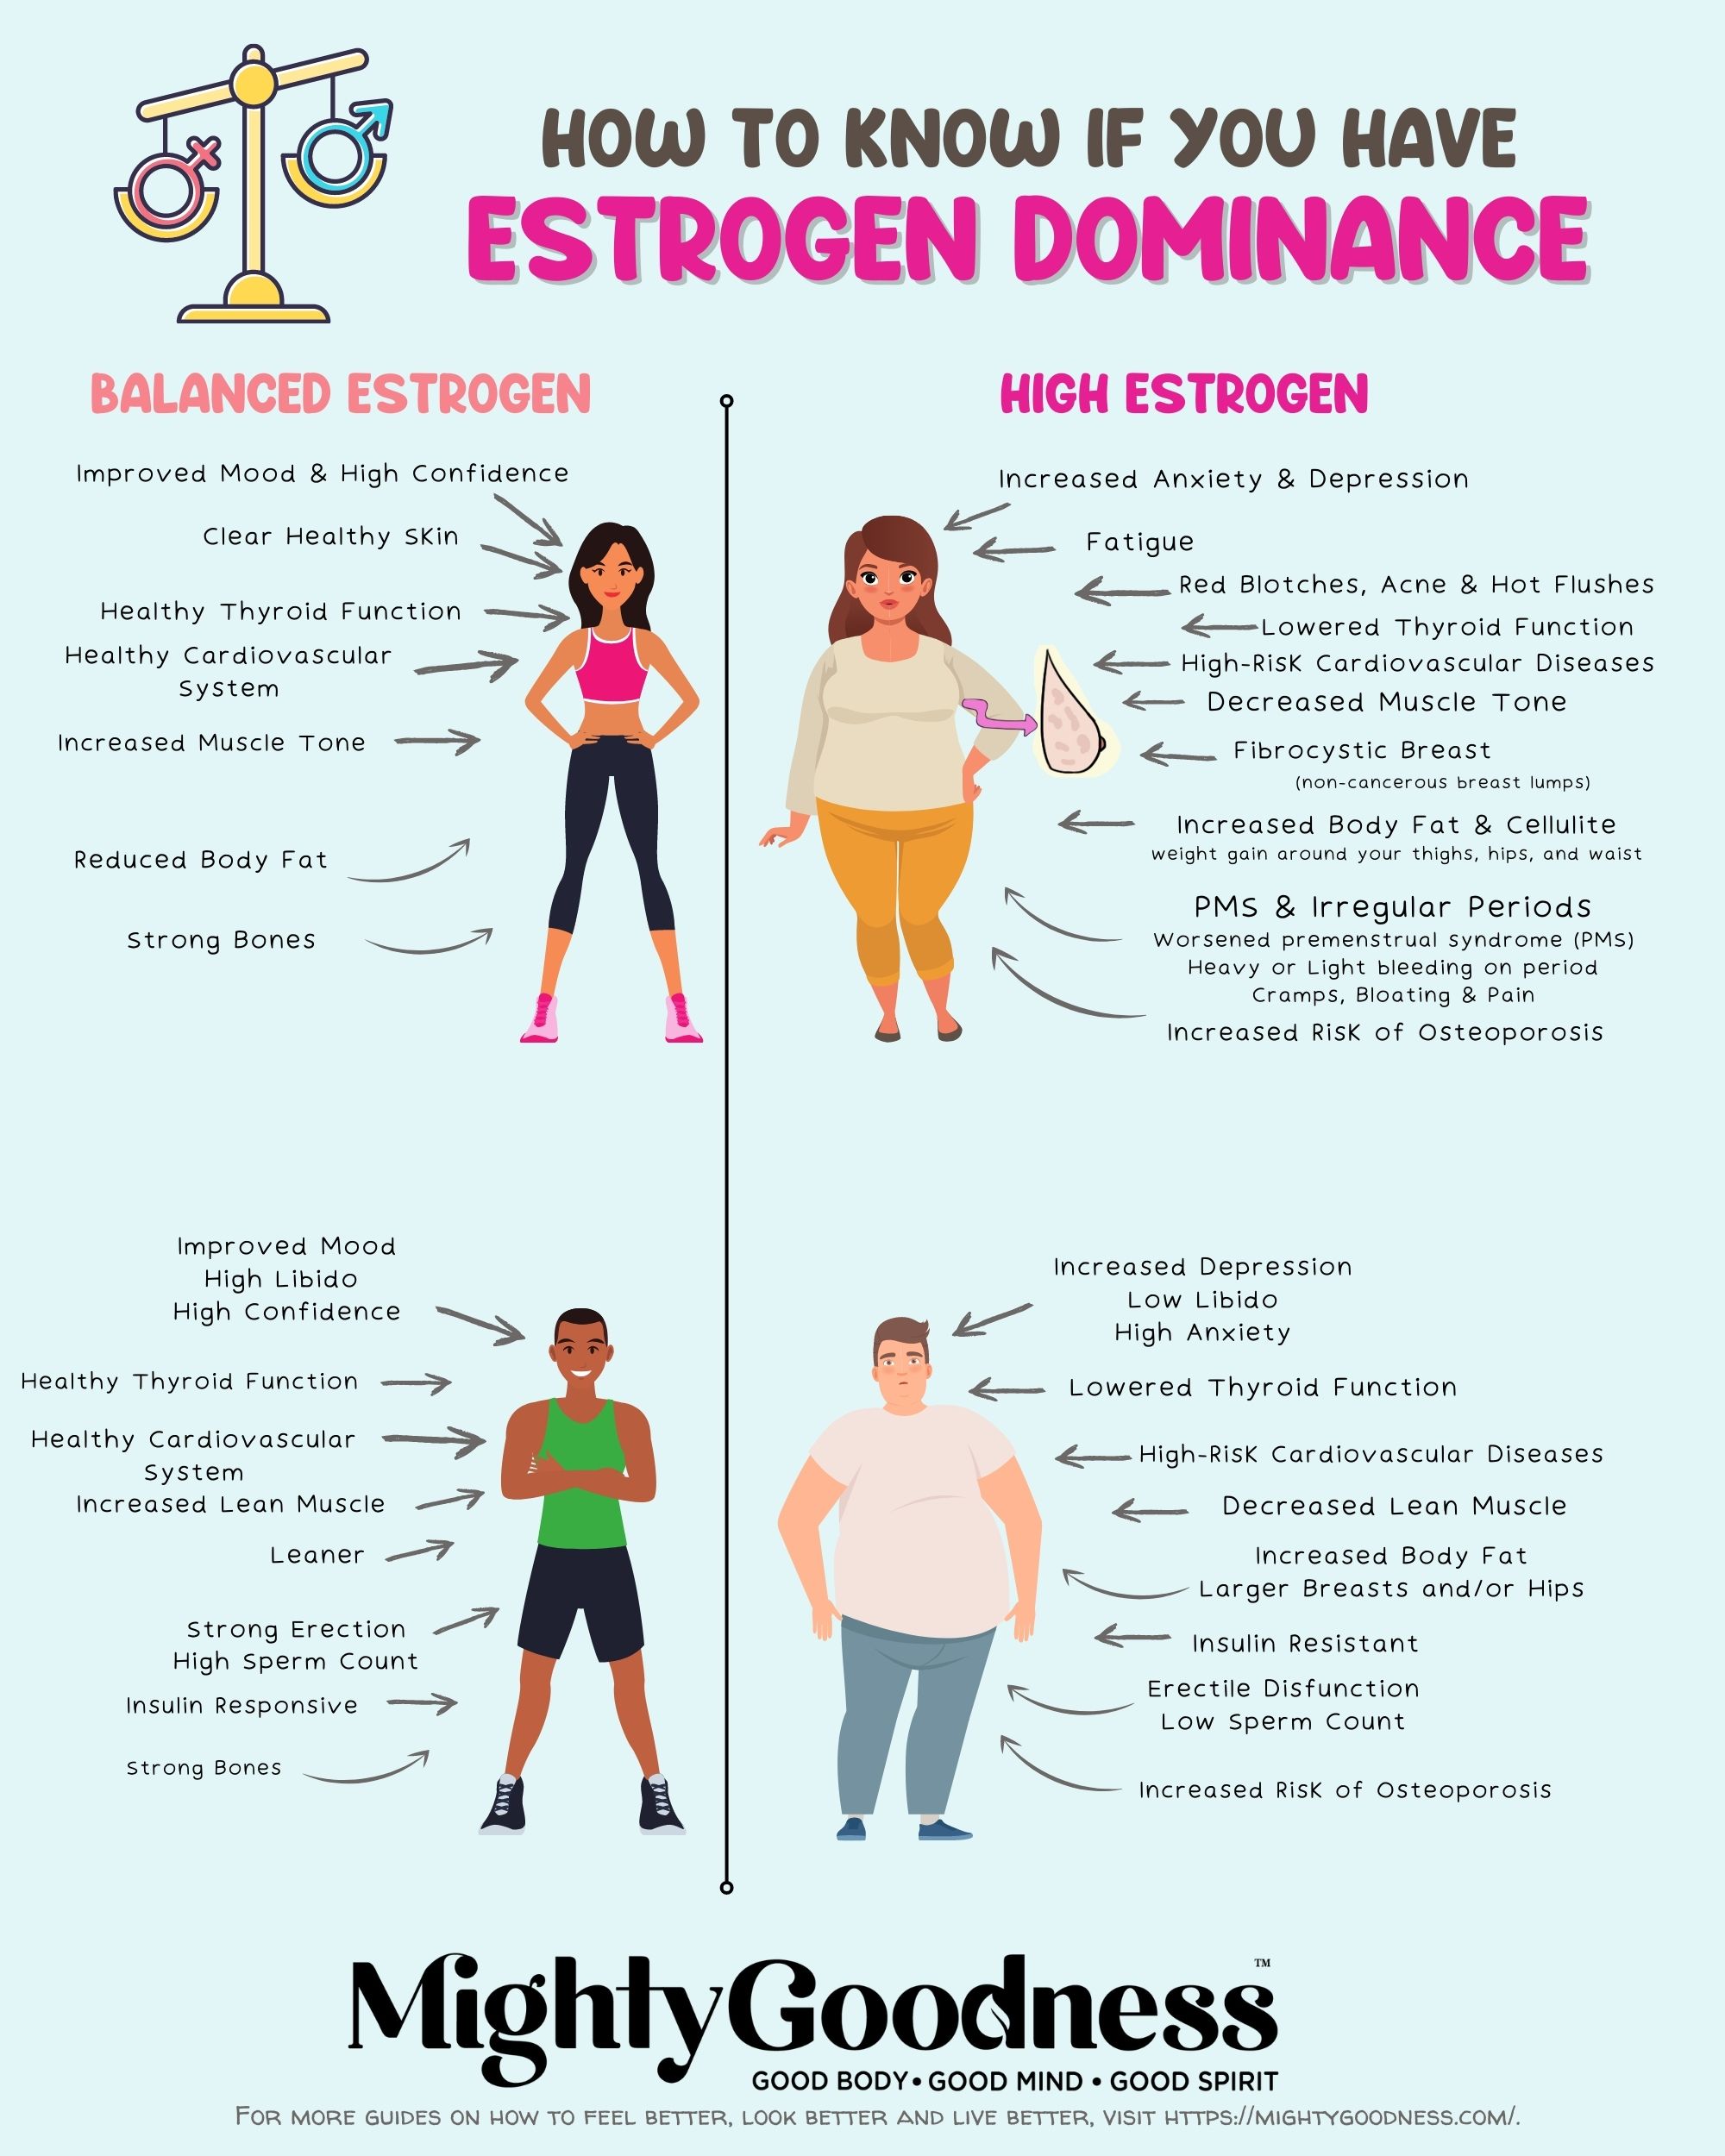 HOW TO KNOW IF YOU HAVE ESTROGEN DOMINANCE (1)